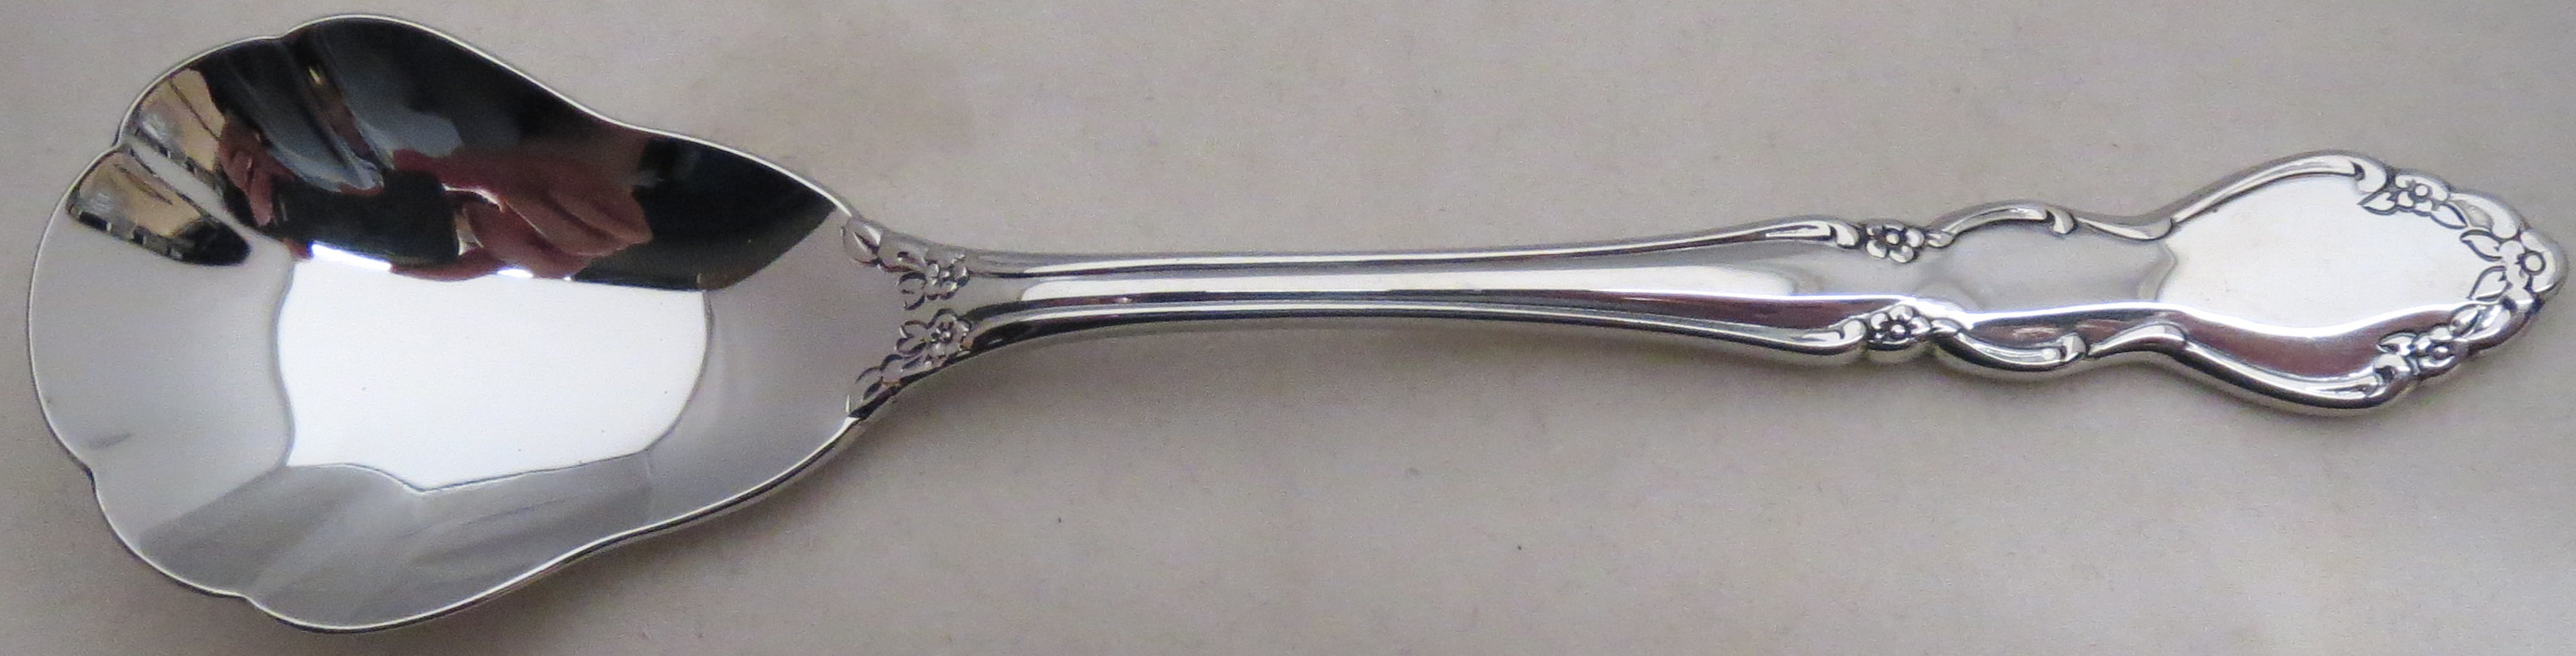 Oneida Dover (Stainless) Sugar Shell Spoon